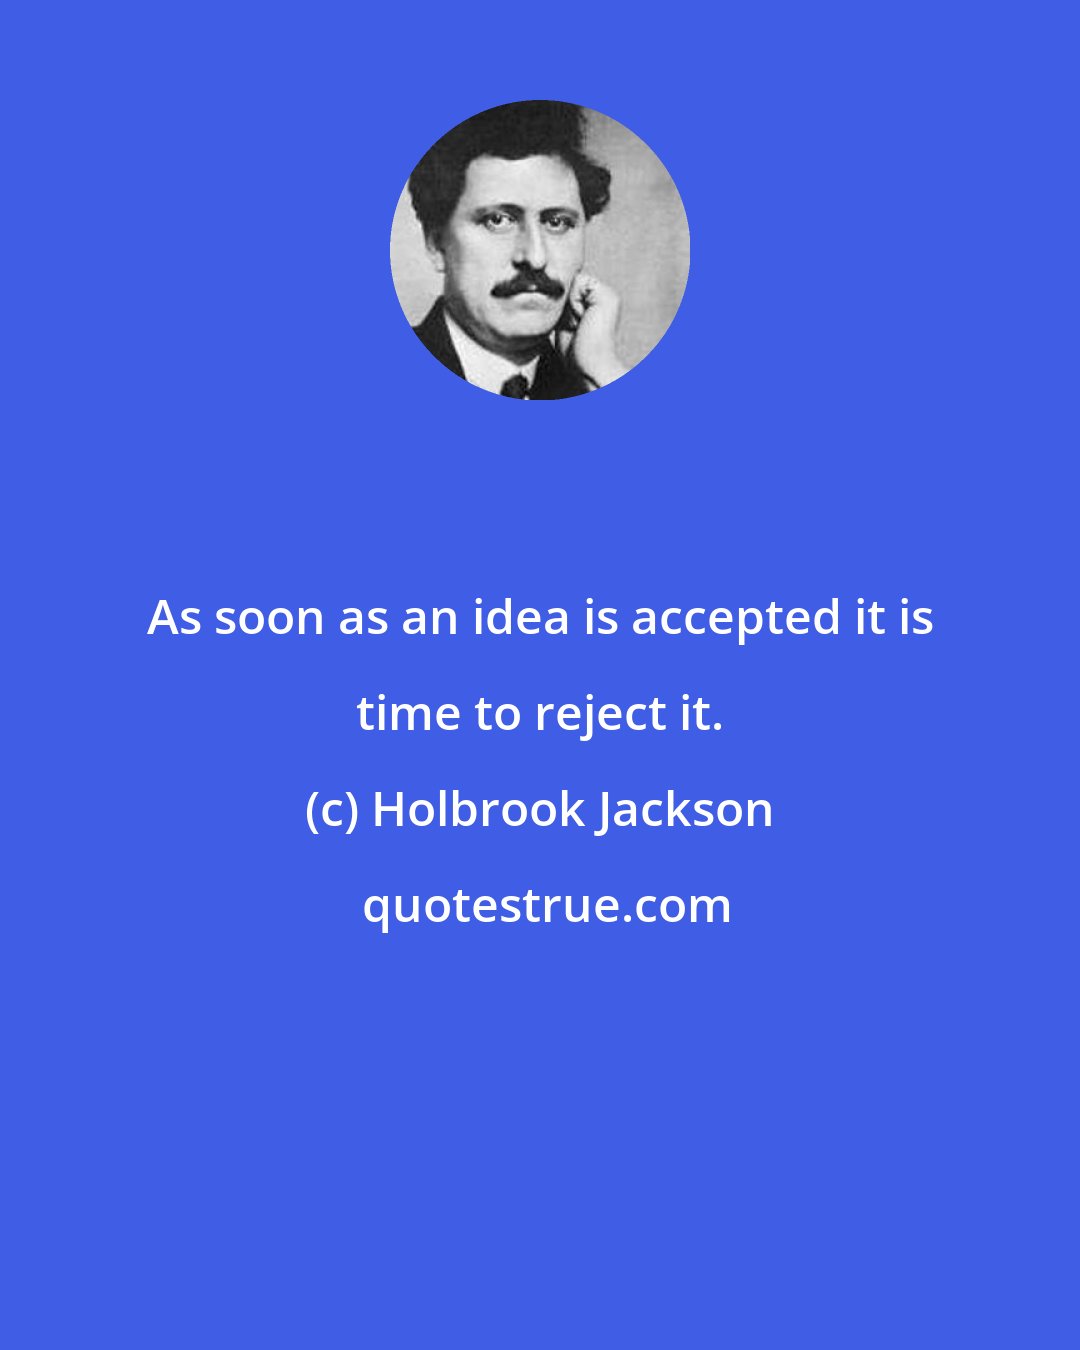 Holbrook Jackson: As soon as an idea is accepted it is time to reject it.